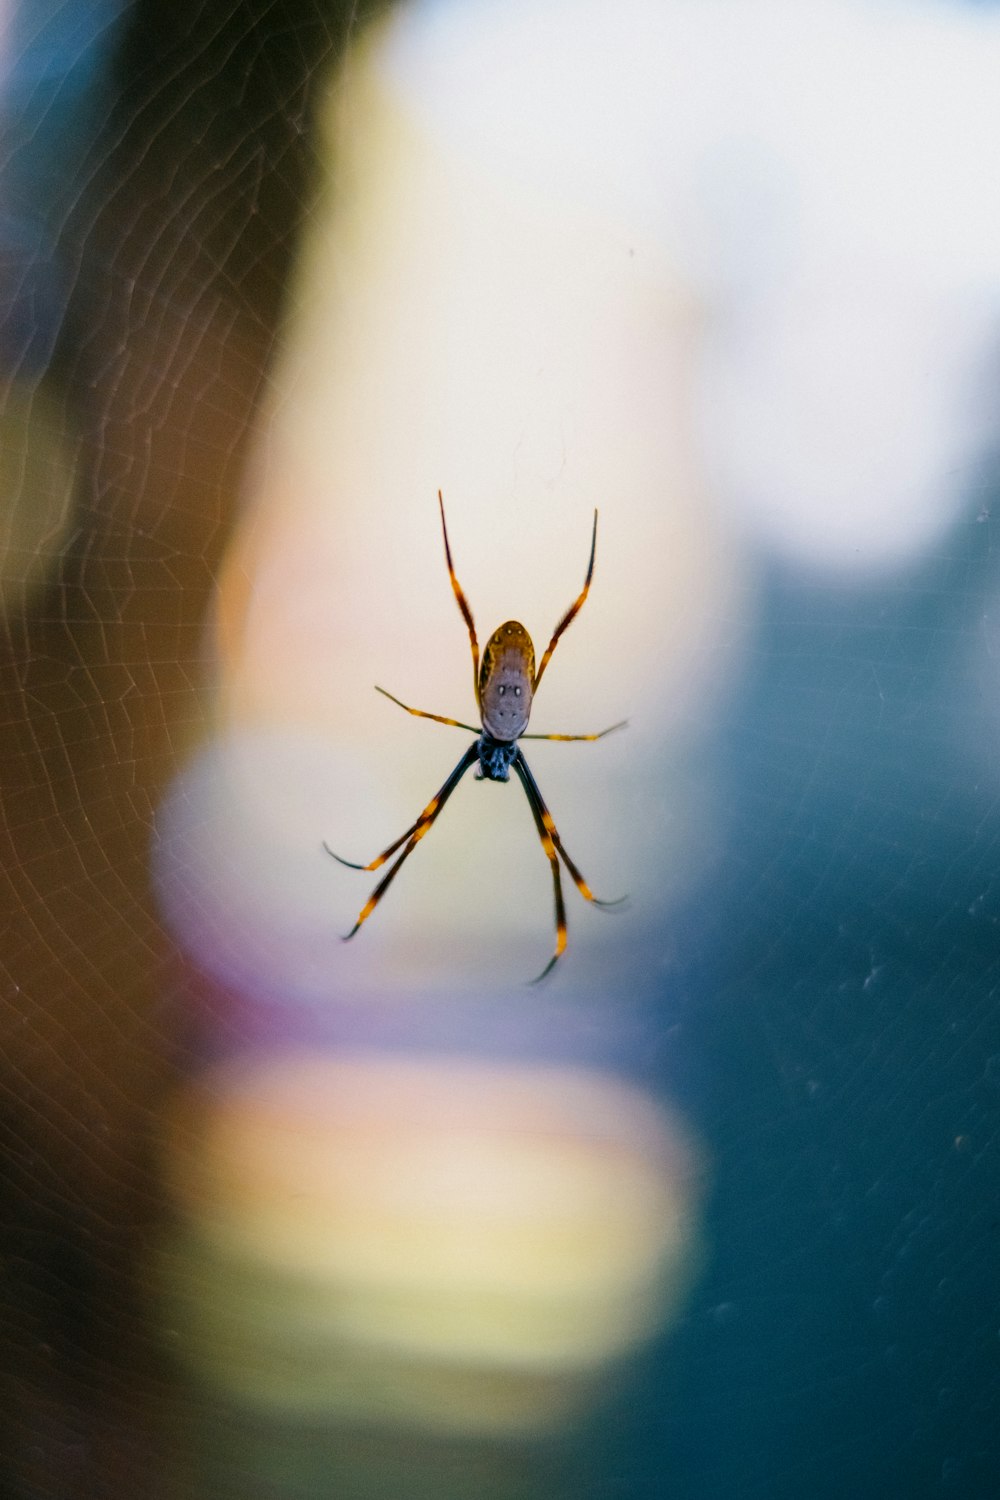 brown and black spider on web in close up photography